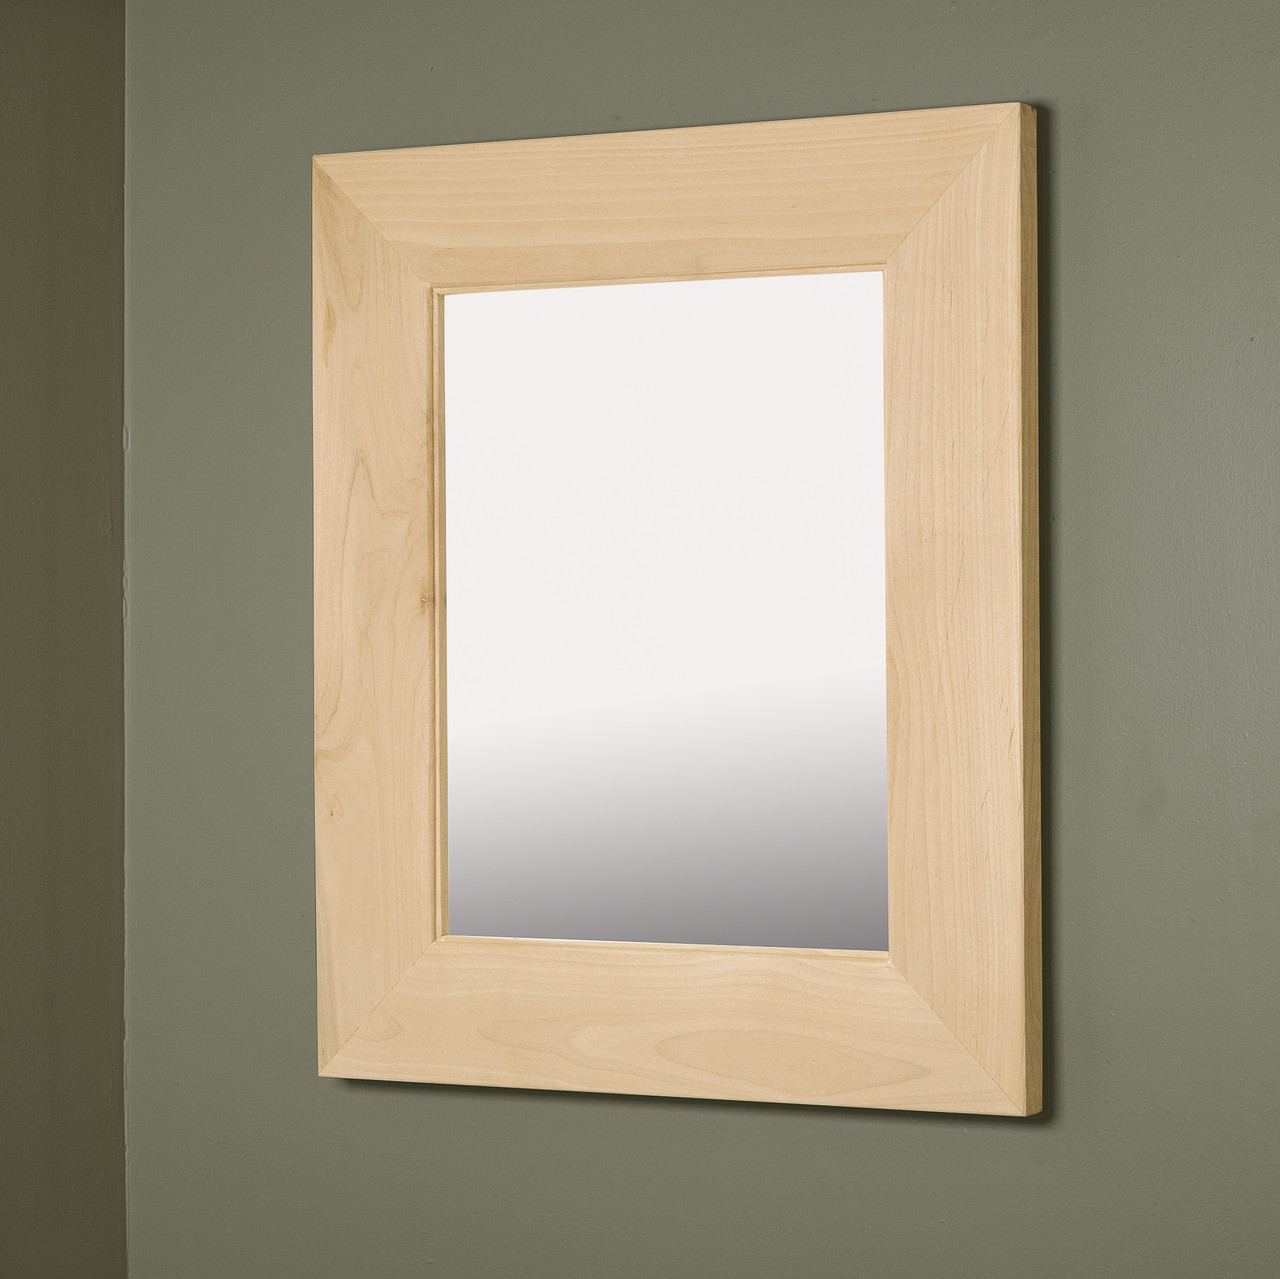 Recessed Medicine Cabinets Without Mirror